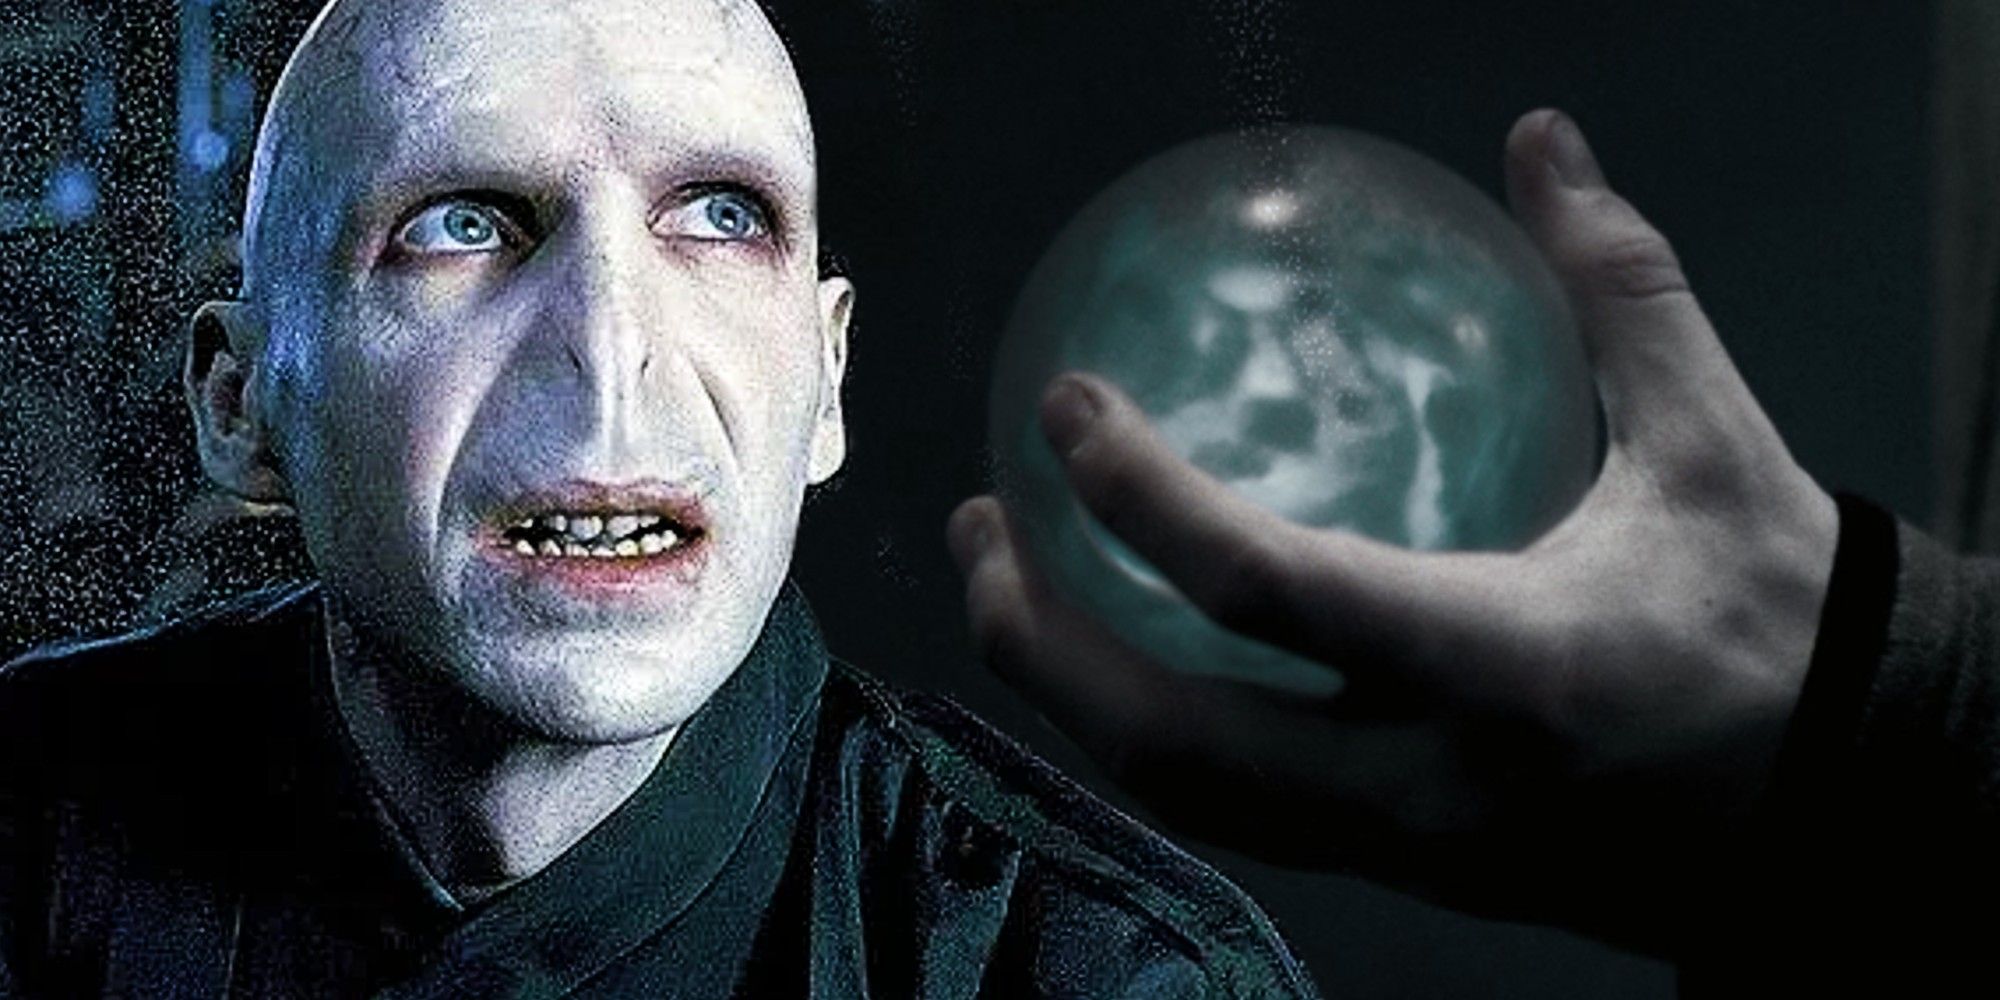 Ralph Fiennes as Voldemort and an image of the orb holding the prophecy in Harry Potter